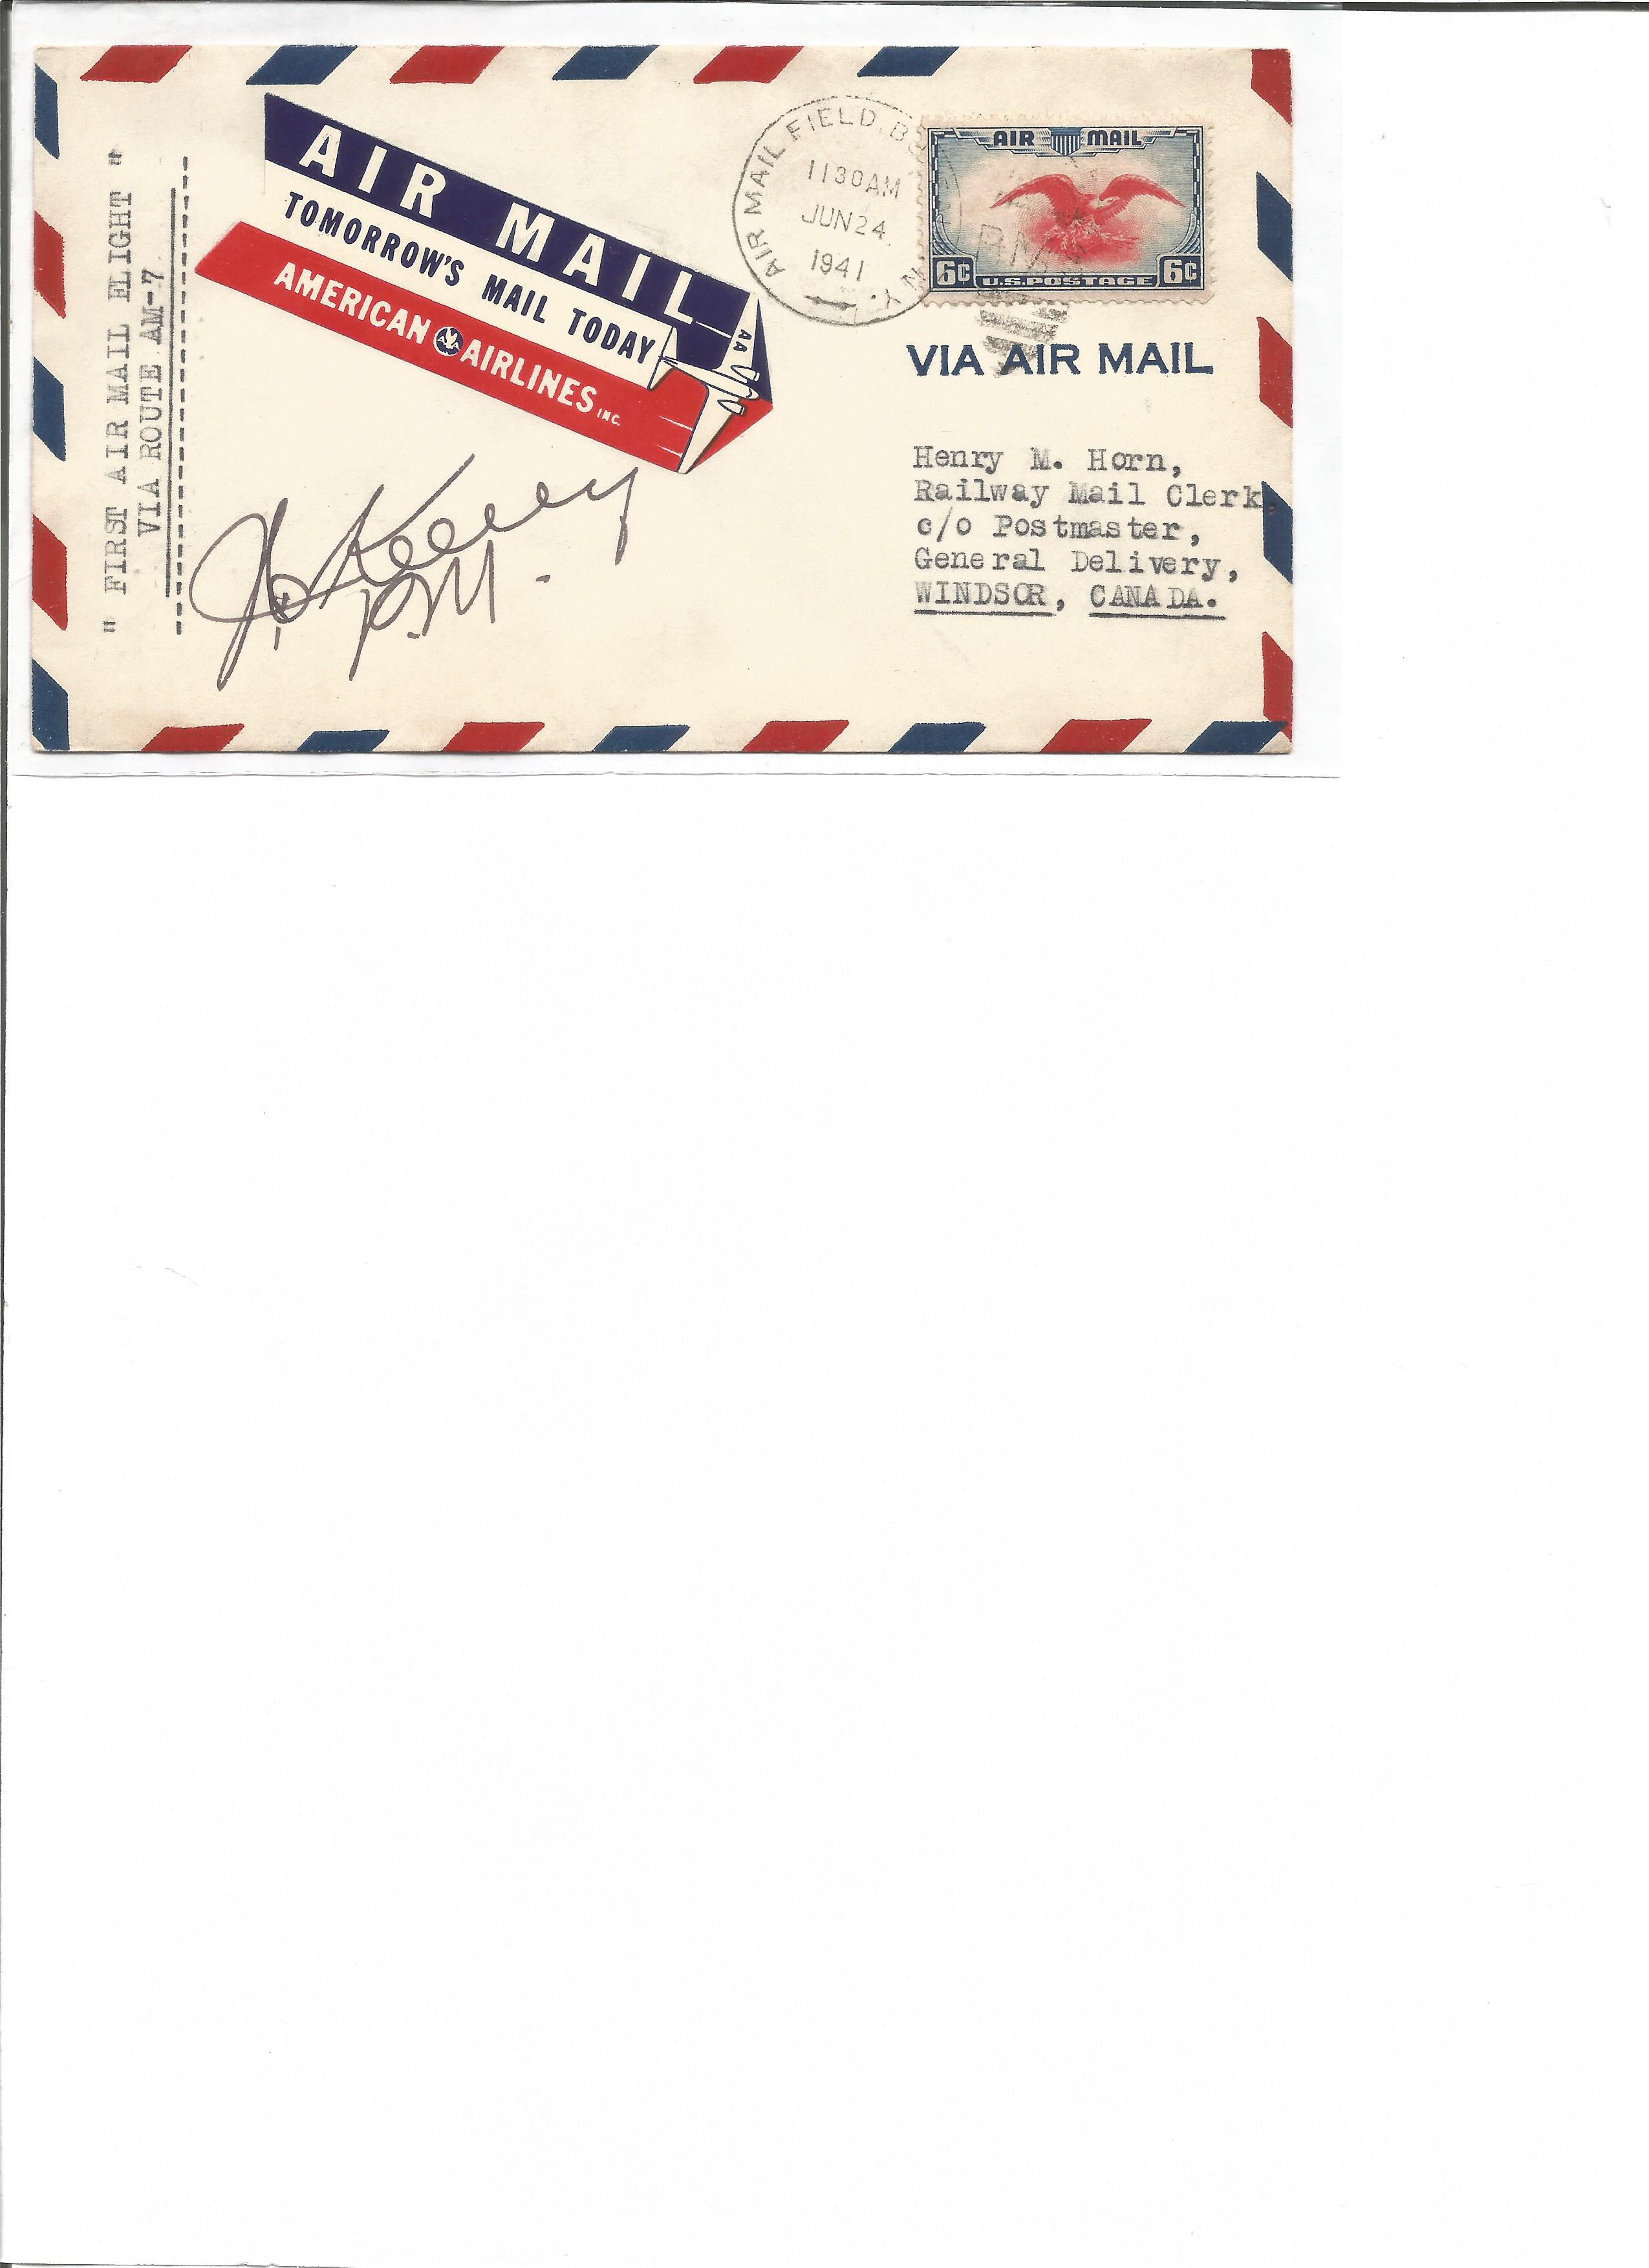 24 June 1941 first flight cover via route AM-7. Good Condition. All autographs are genuine hand